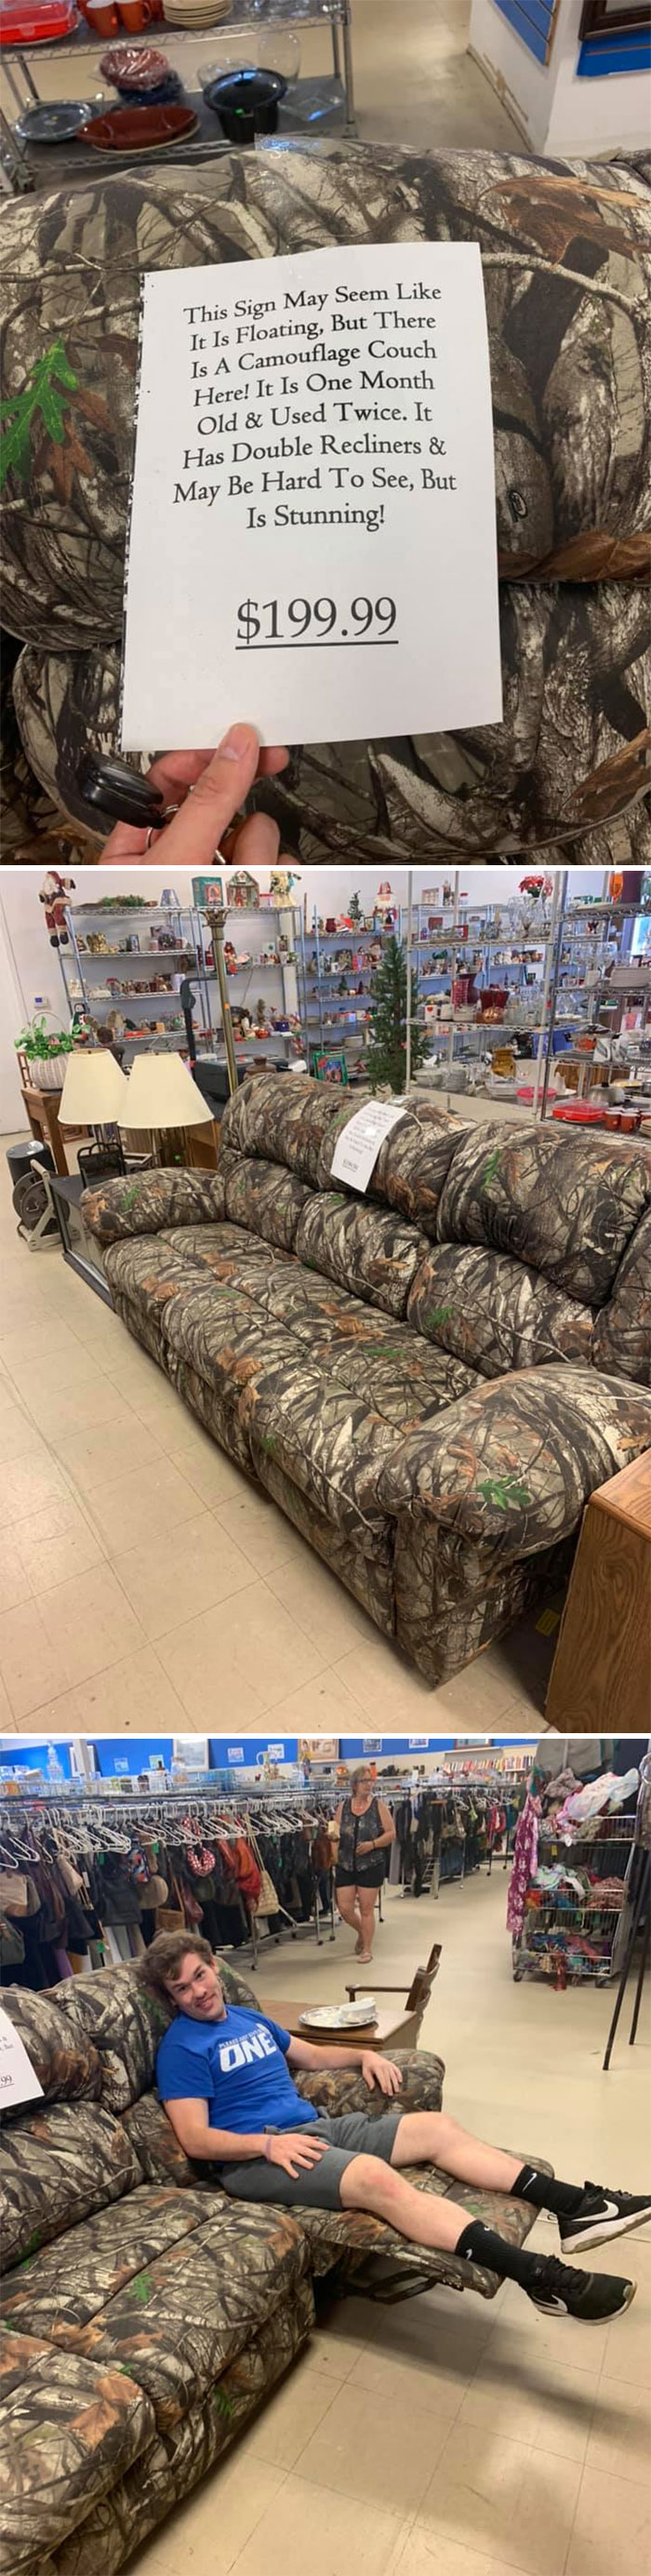 I Still Don’t See A Couch But For As Comfortable As This Empty Space Was It Did Not Come Home With Me